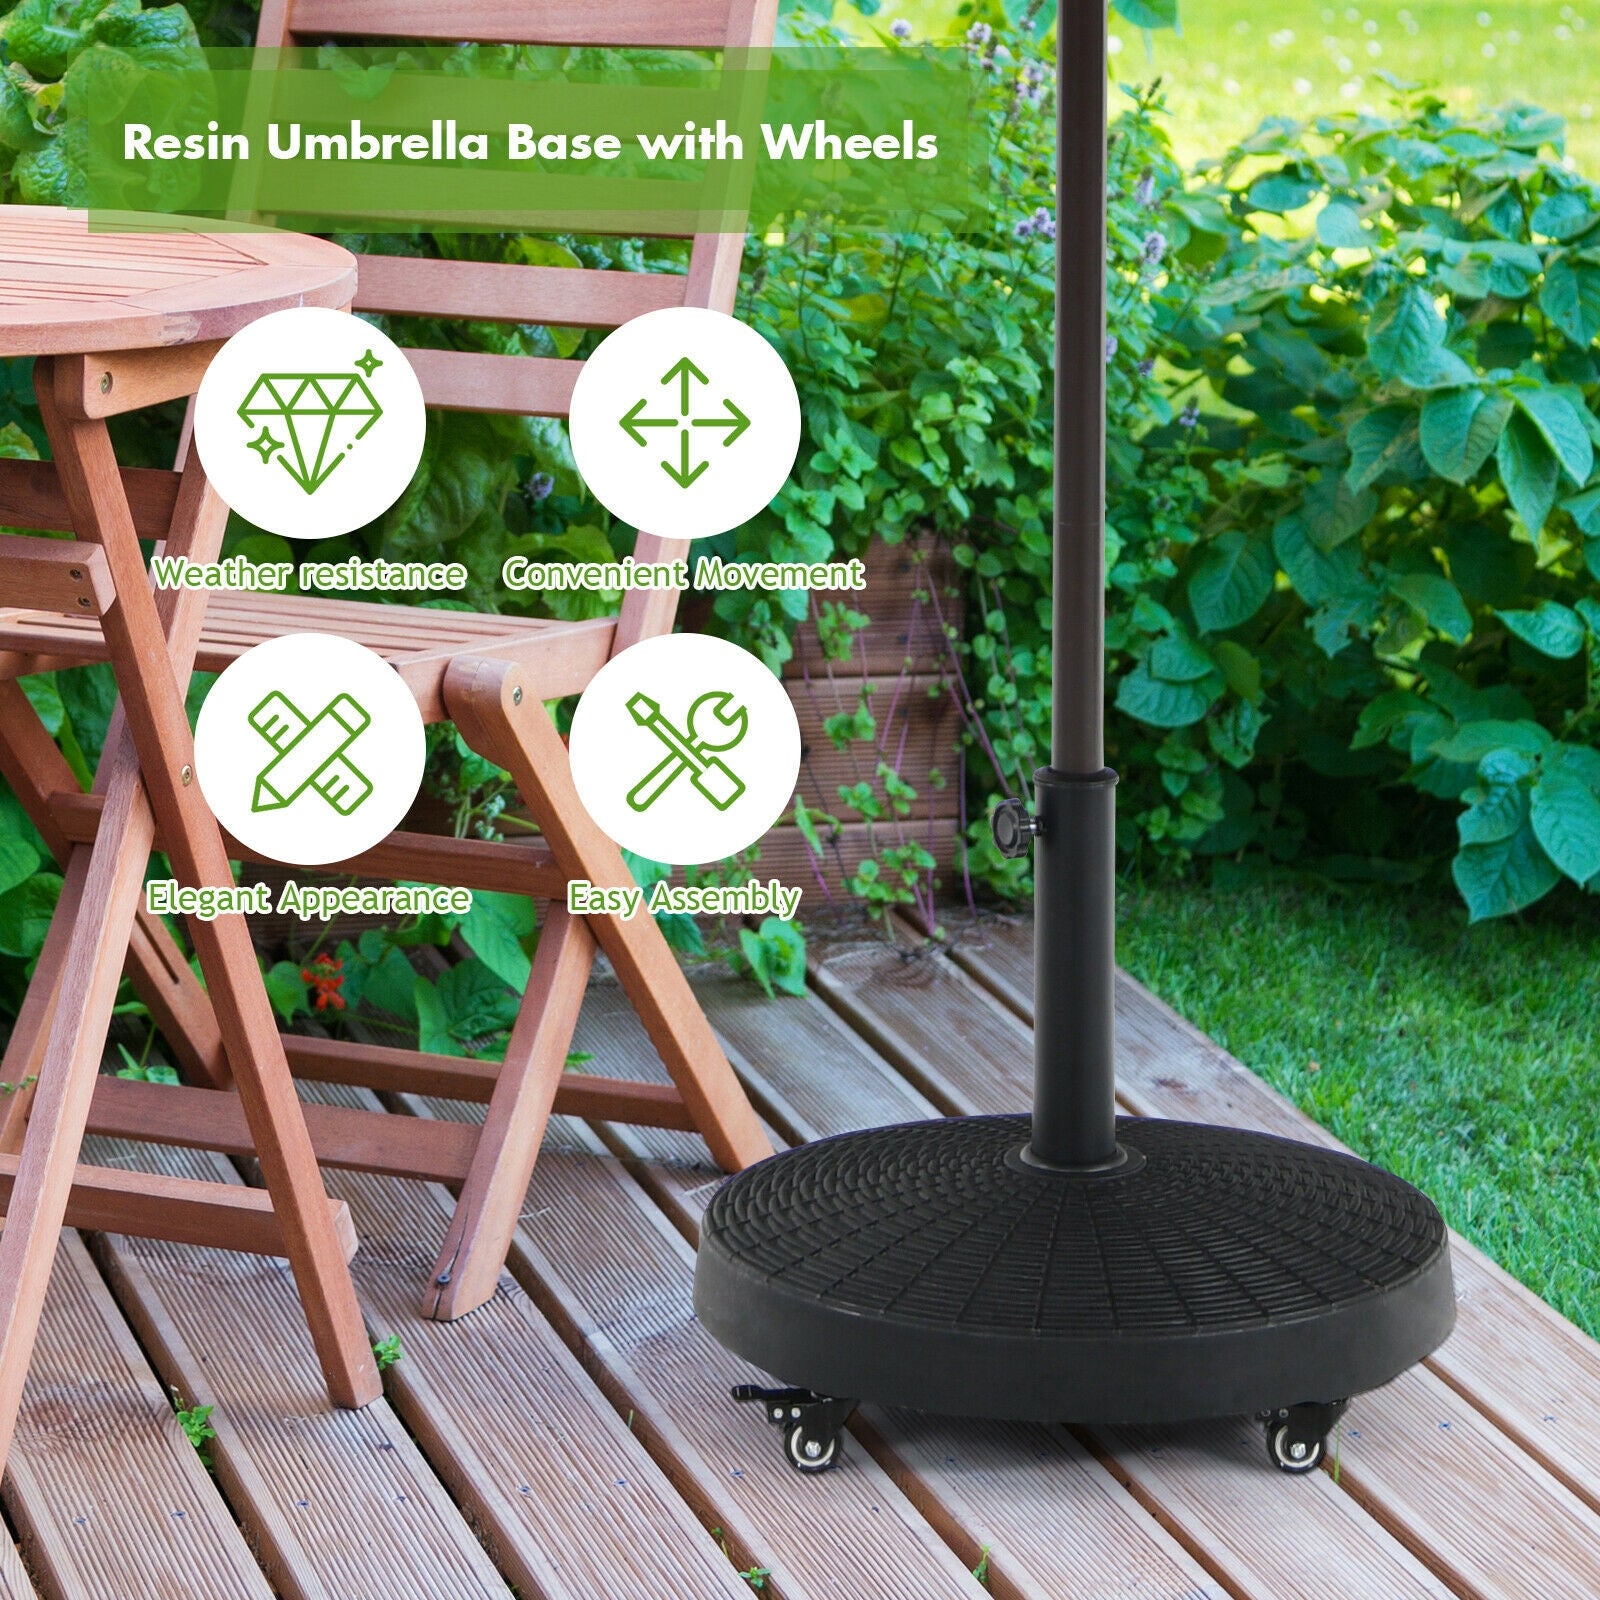 Sturdy Resin Base: Weighing a substantial 50 lbs, this patio resin umbrella base is robust and strong enough to support your patio umbrella. The hand knob on the steel tube can be tightened to firmly secure the umbrella pole, providing stability and preventing the umbrella from falling.